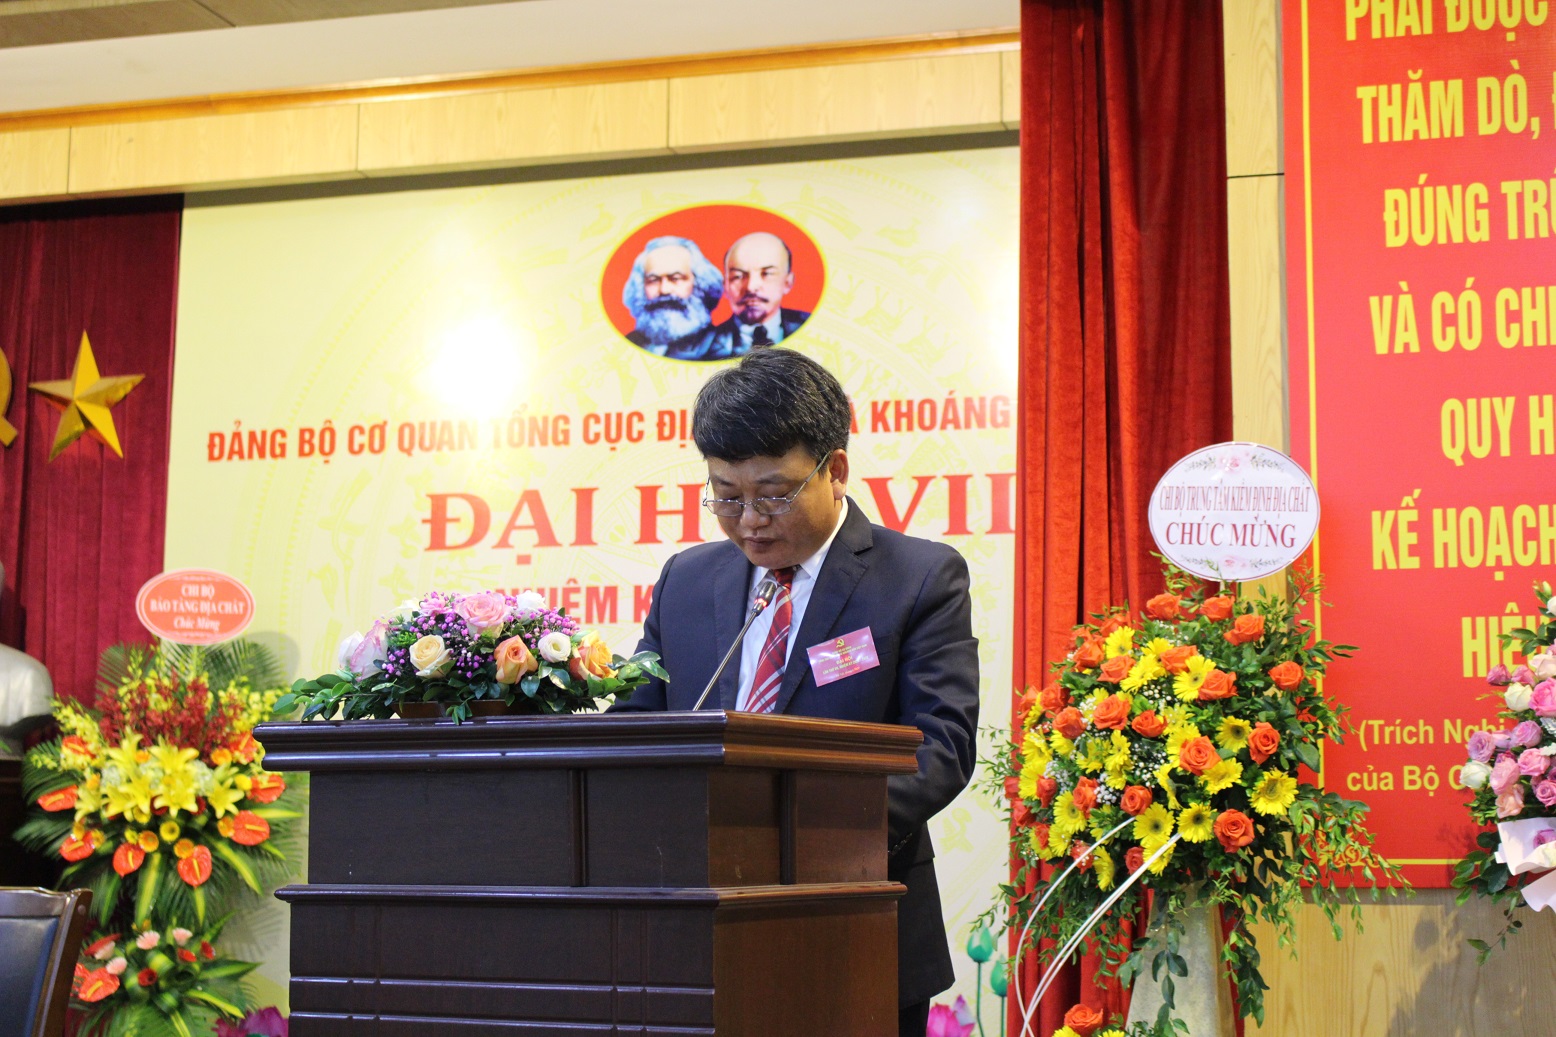 Dinh Duc Anh